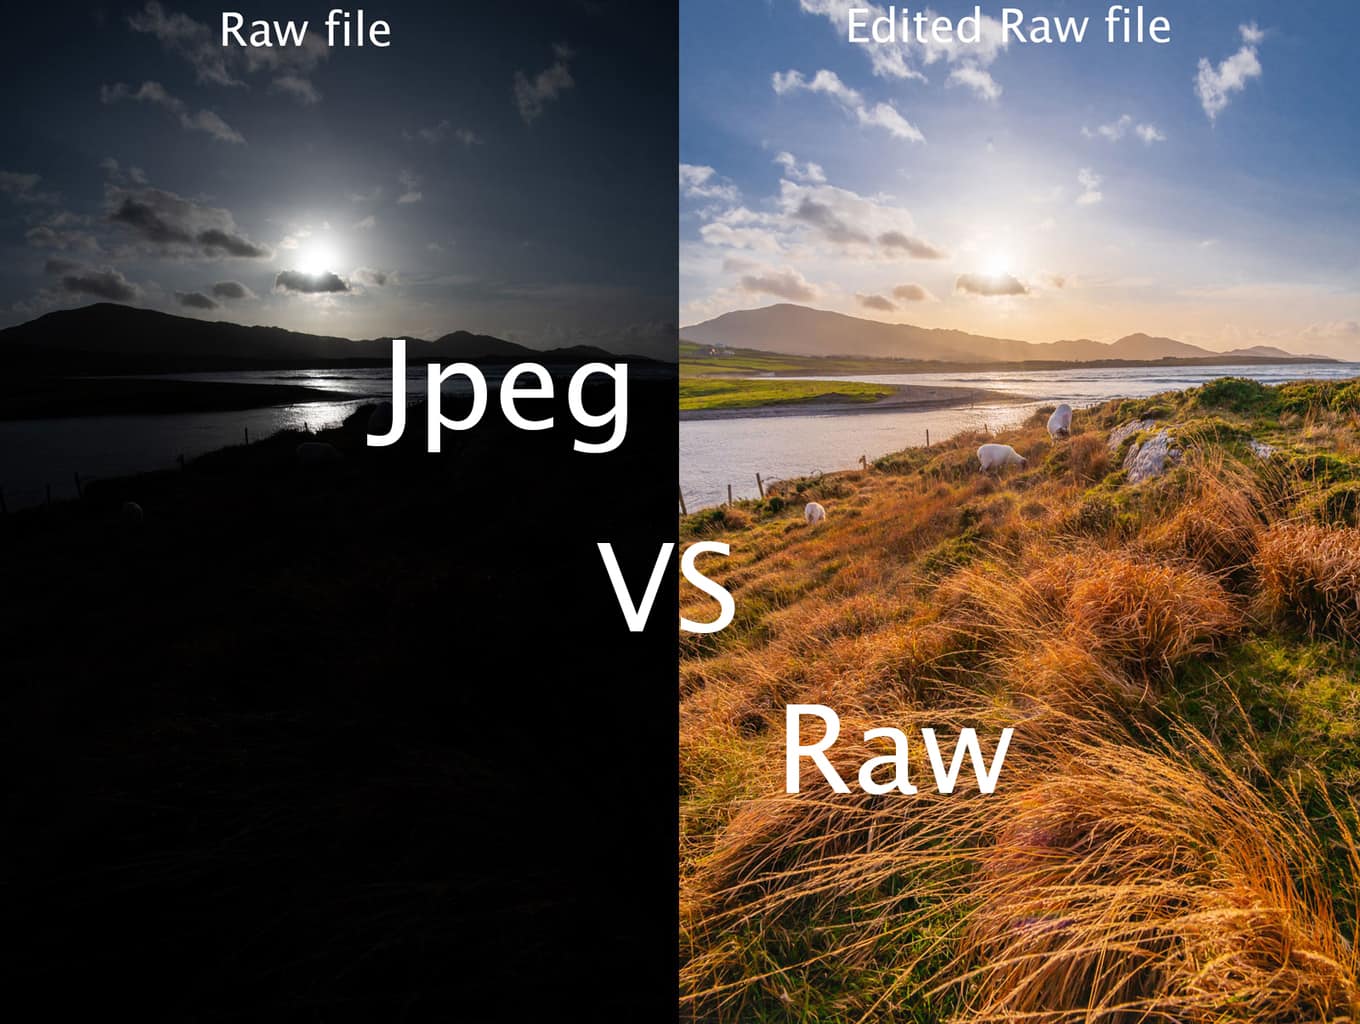 Jpeg vs Raw which is better and why?